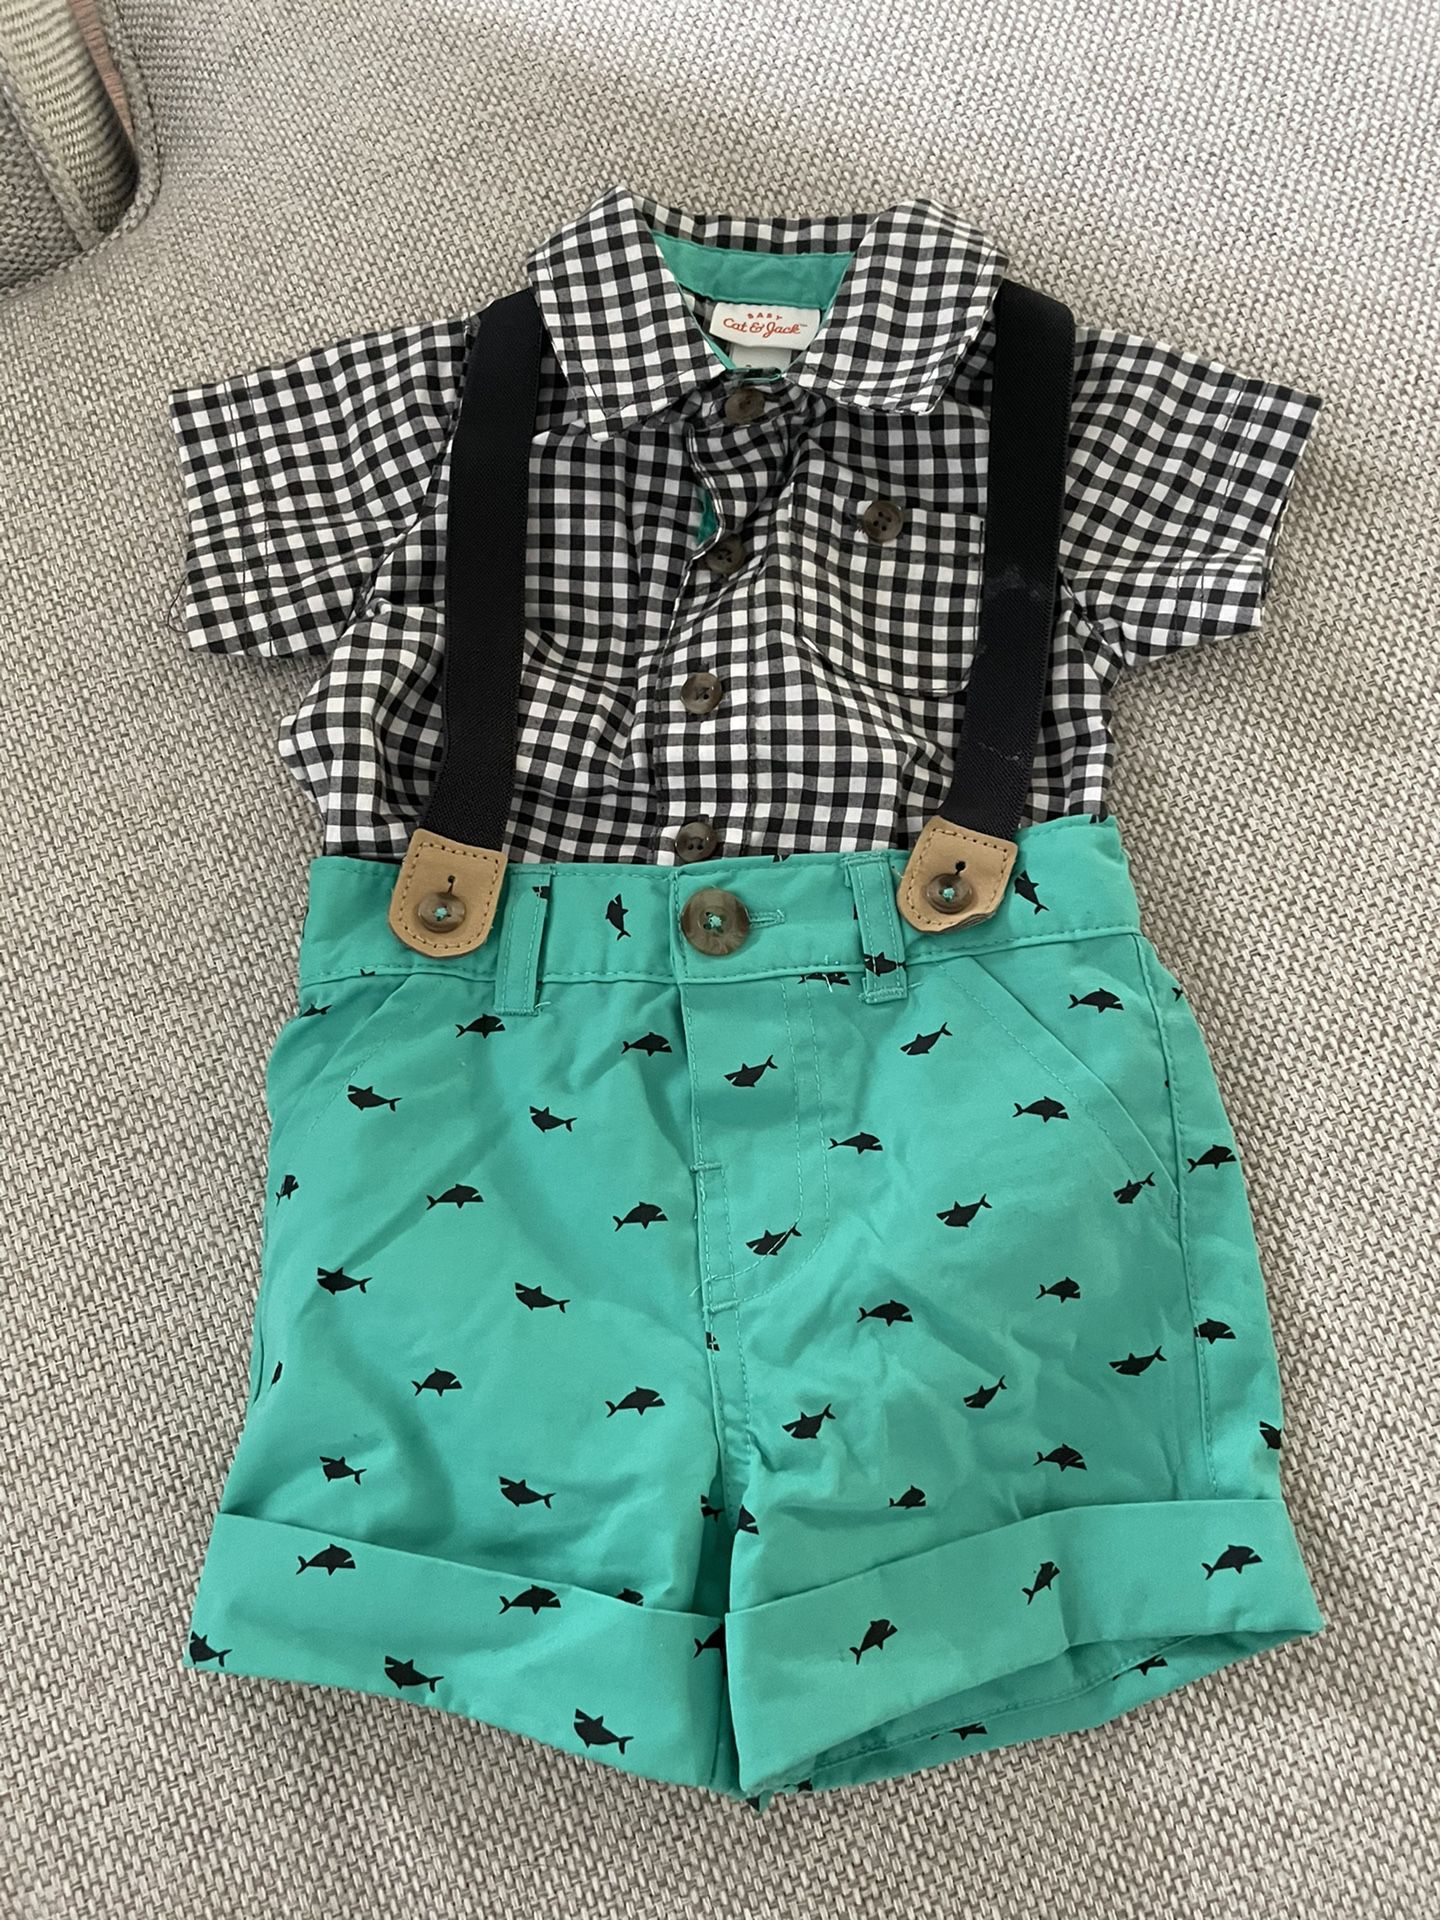 Baby Boy Clothes! Brand New Or Barely Worn. 